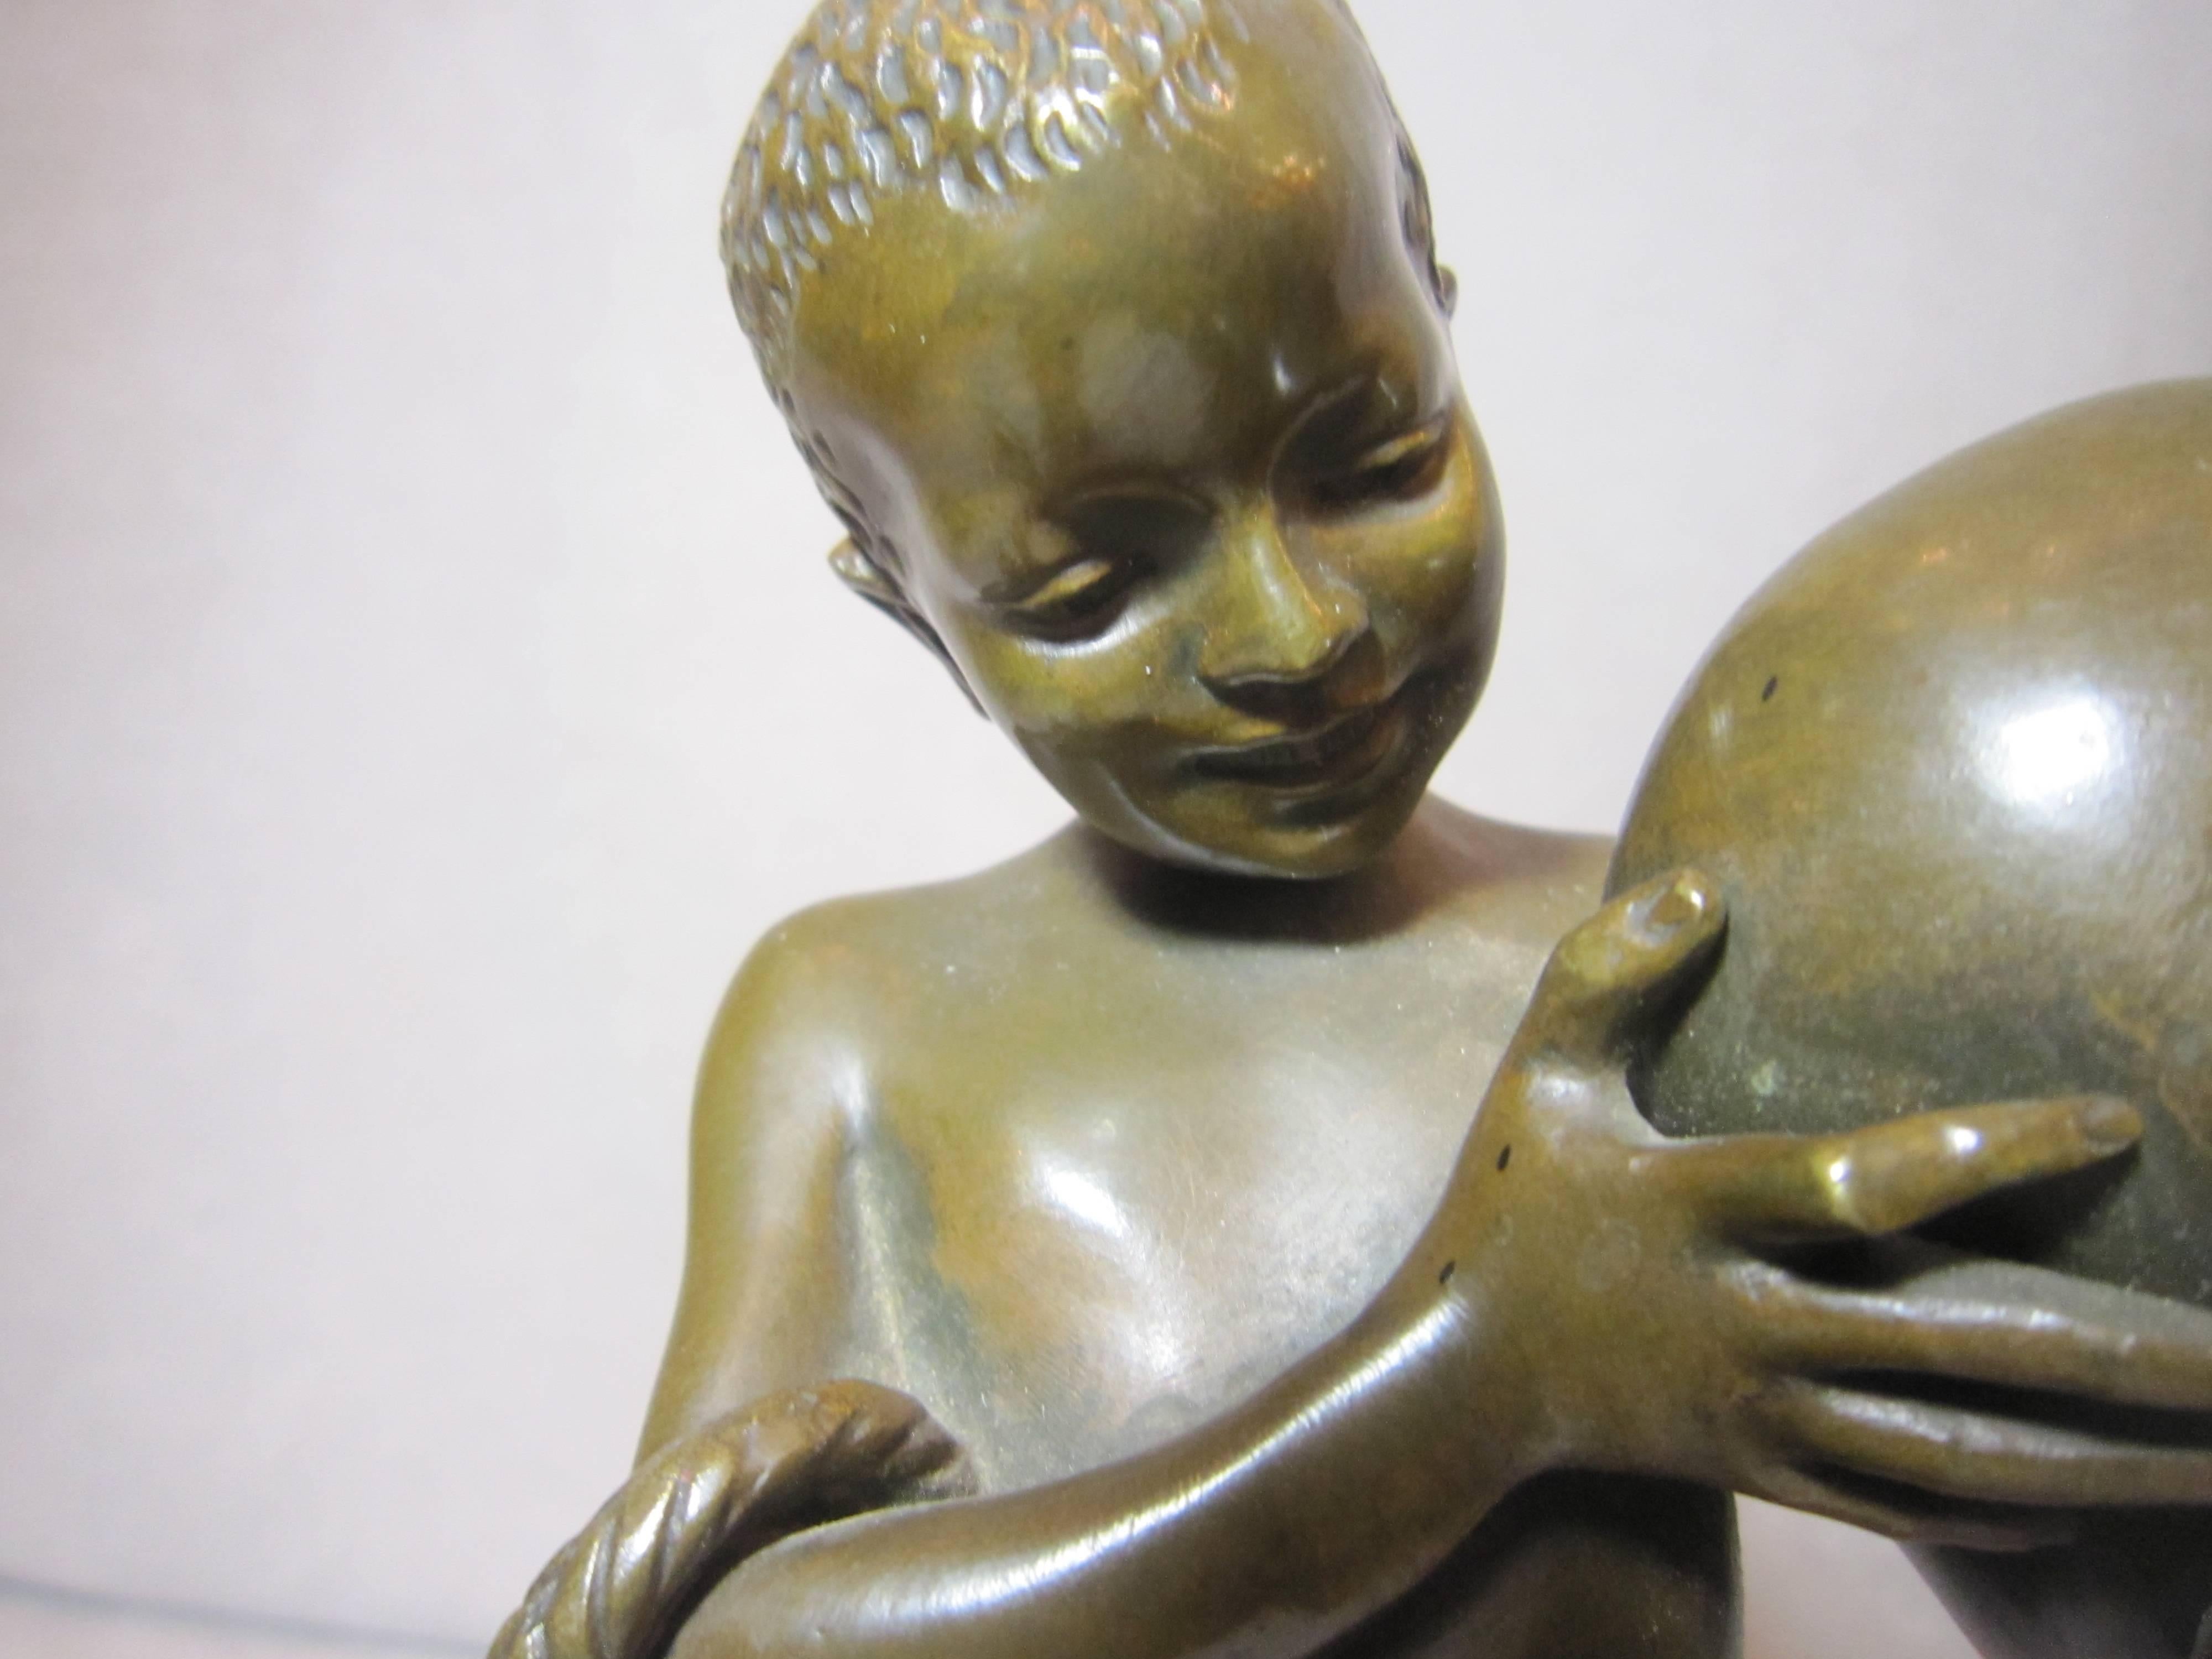 This very endearing sculpture of a young Orientalist boy is artist signed 